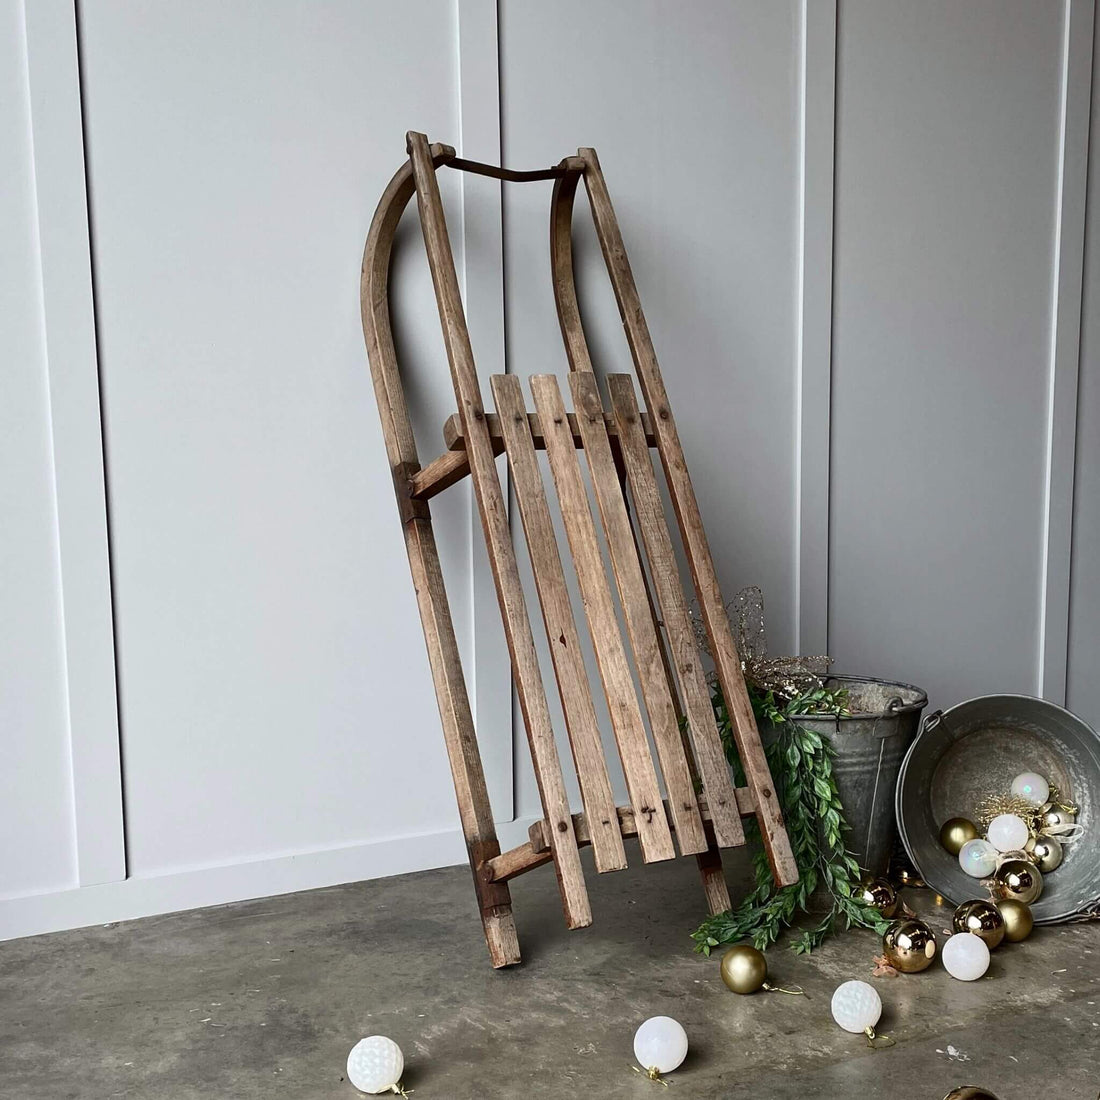 A Vintage snow sled for Christmas decoration 